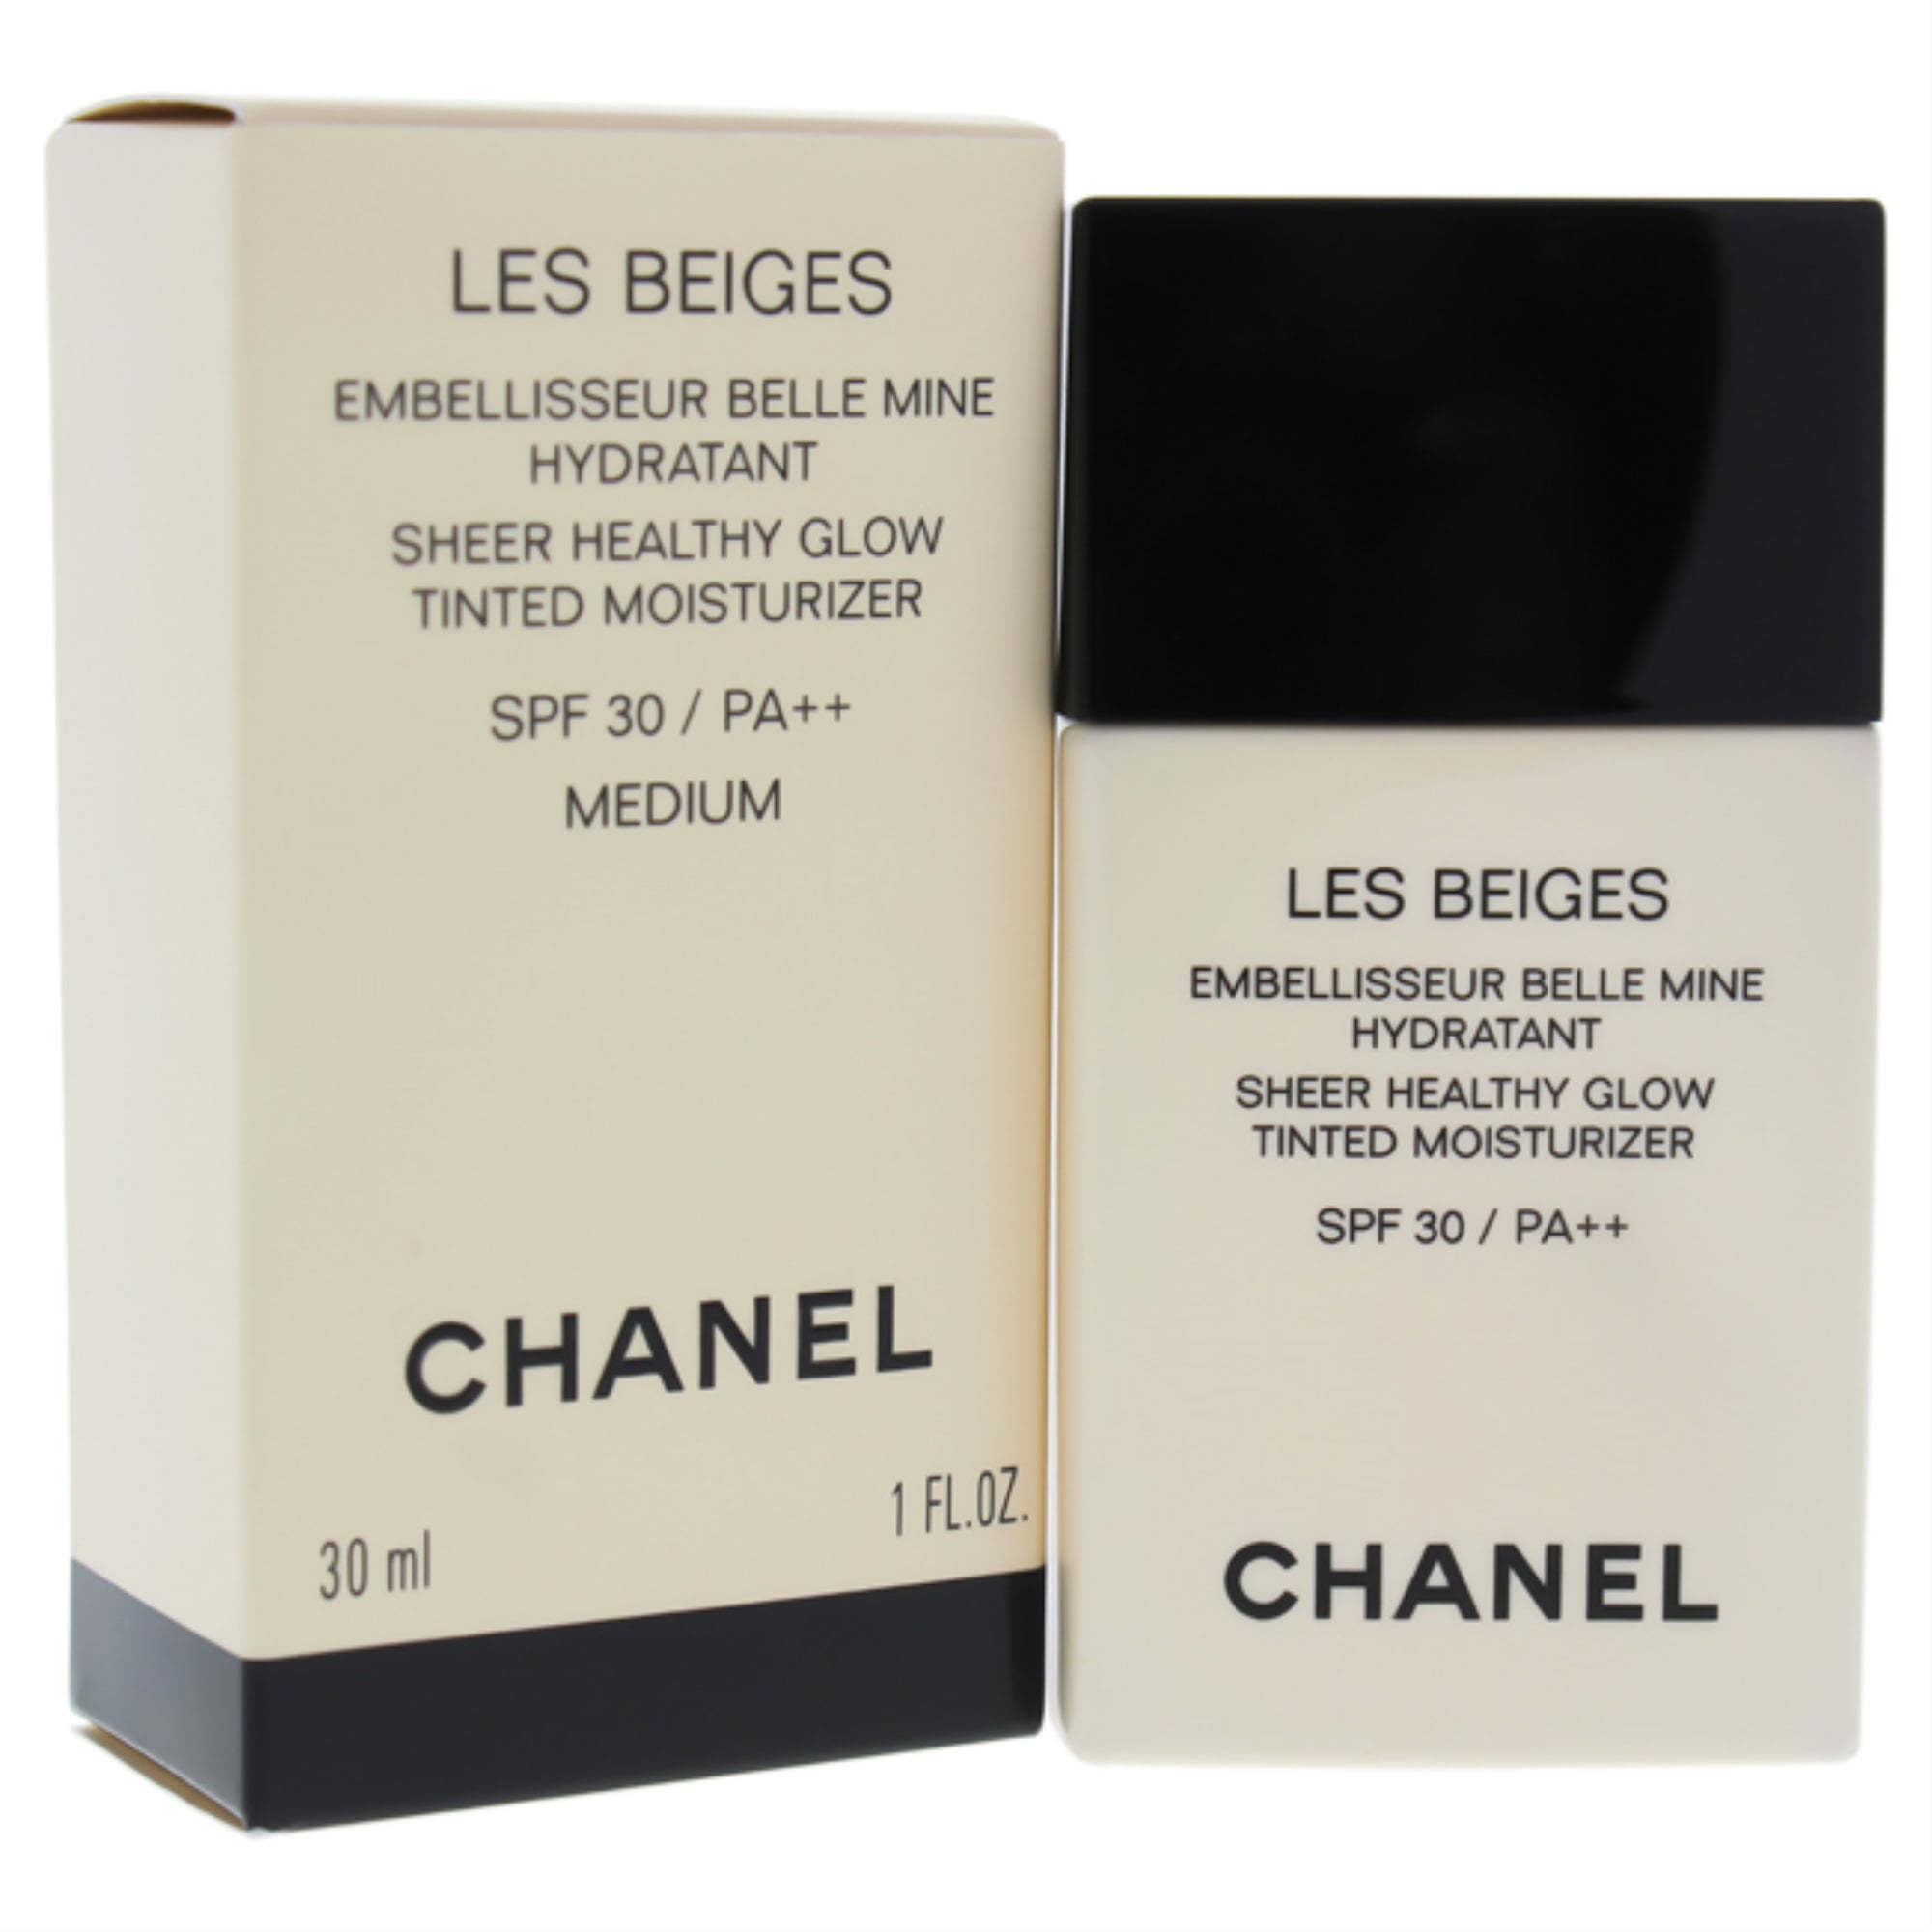 Chanel Les Beiges Sheer Healthy Glow Tinted Moisturizer SPF 30 30ml/1oz buy  in United States with free shipping CosmoStore